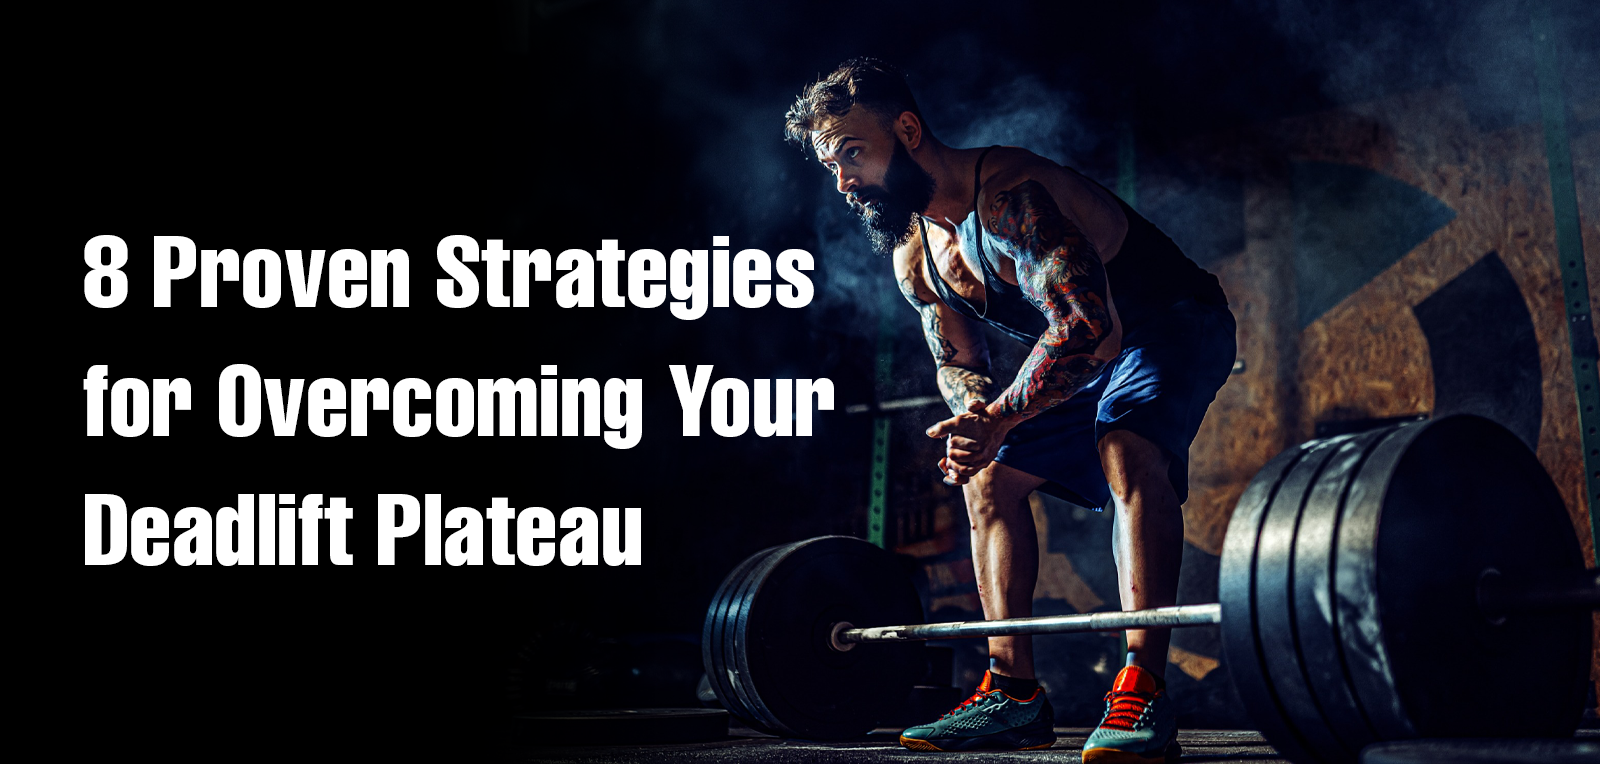 8 Proven Strategies for Overcoming Your Deadlift Plateau